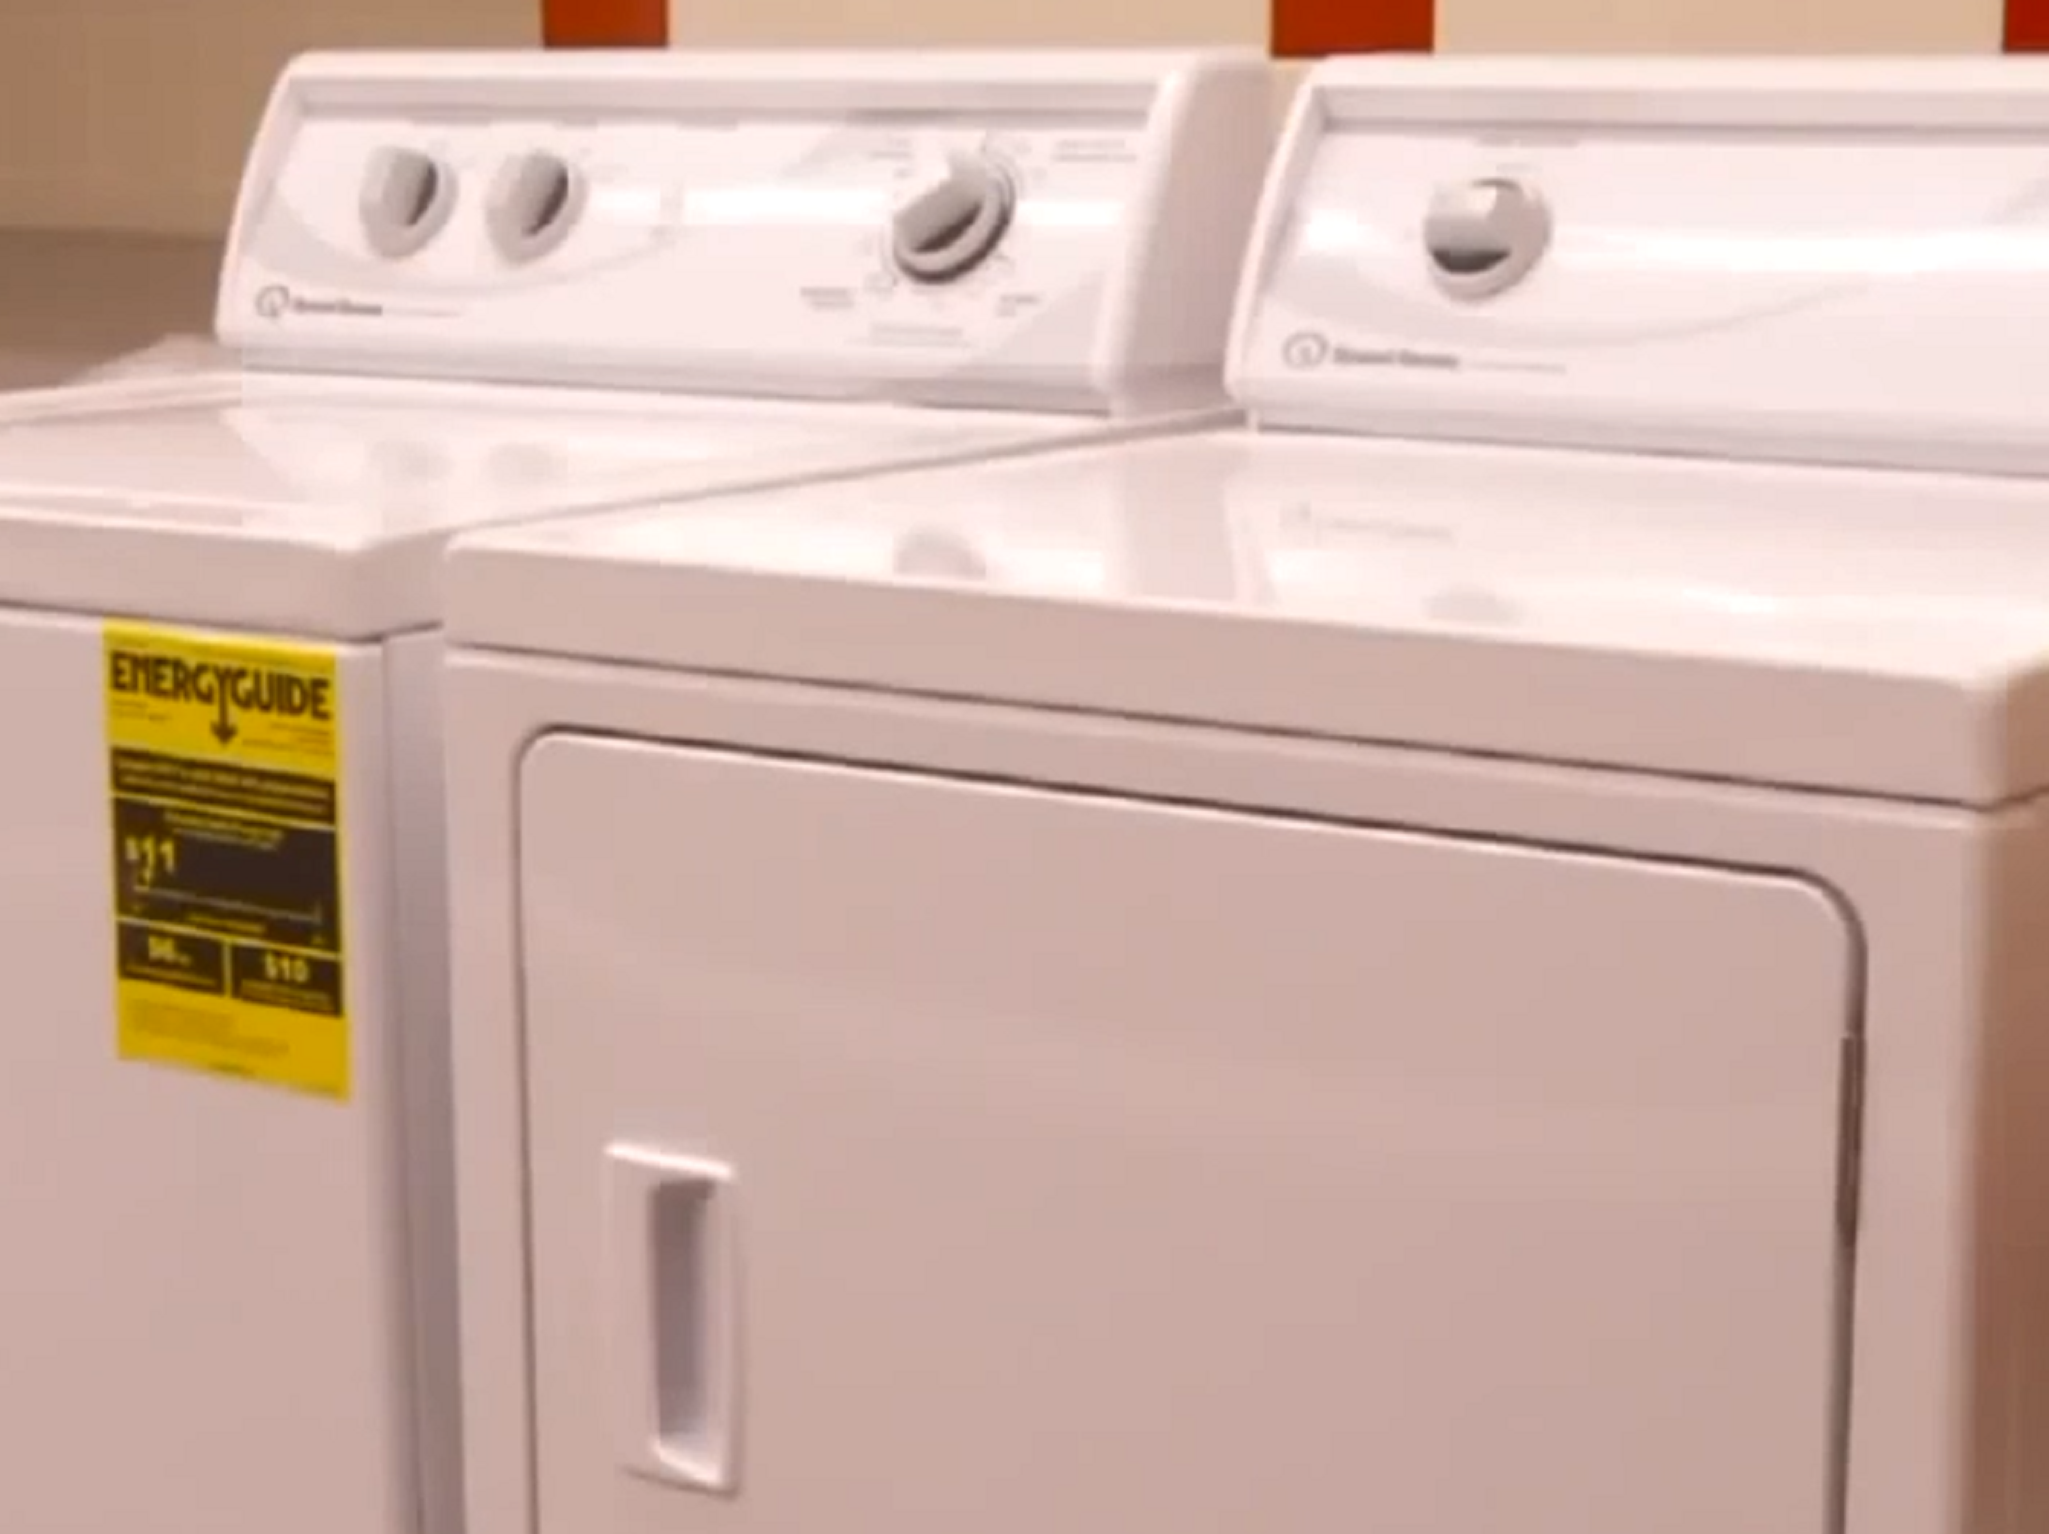 Washing machines and showers have been installed in the laundry room for homeless students